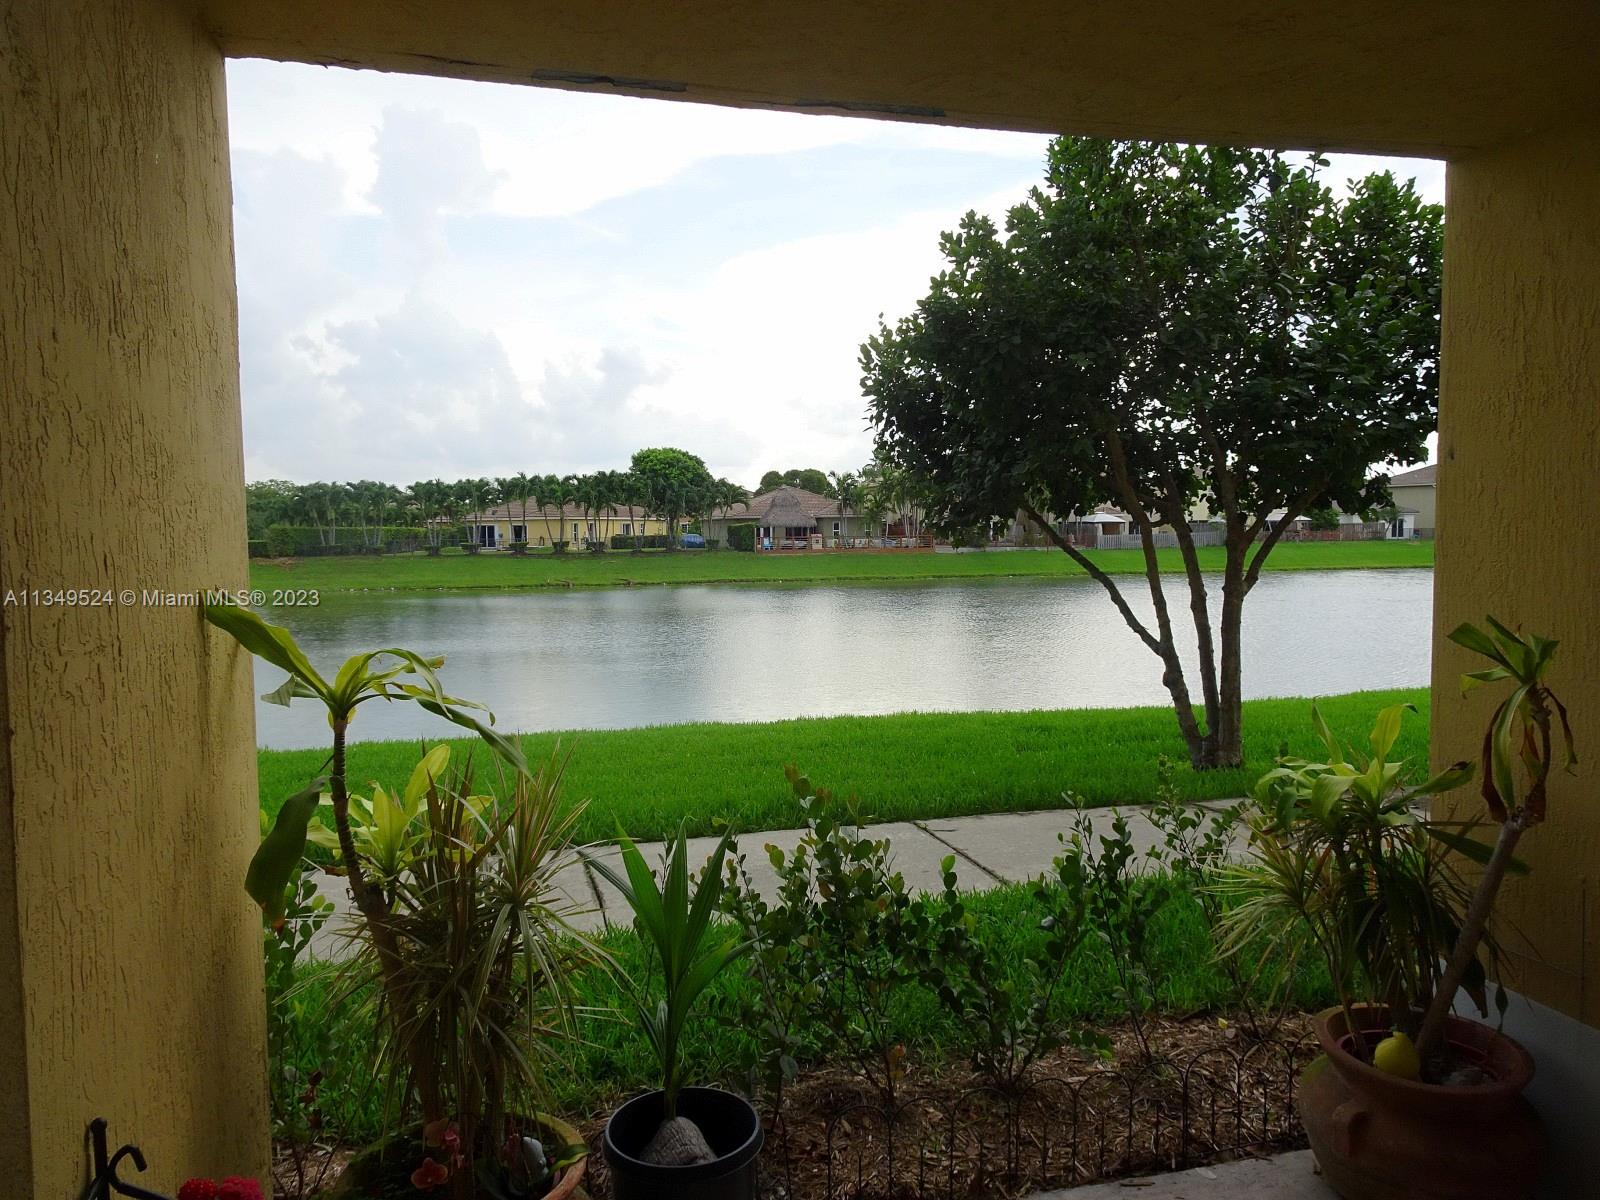 Great Location, near FL Turnpike.  Beautiful & Relaxing lake view 2/2 apartment on first floor, covered terrace, featuring 2 master bedrooms with split layout for privacy and full bath accessible inside rooms.  Lake view from practically everywhere, 2 assigned parking, upgraded kitchen with tastefully selected granite counter tops, impact glass for storm protection, fire protection sprinkler ceiling system in condo, crown moldings, outside storage private room, nice laundry inside with full size washer and dryer, facing west for nice sunsets.  Just a few minutes from the Black Point Marina.  Call me for private tours, will not last.